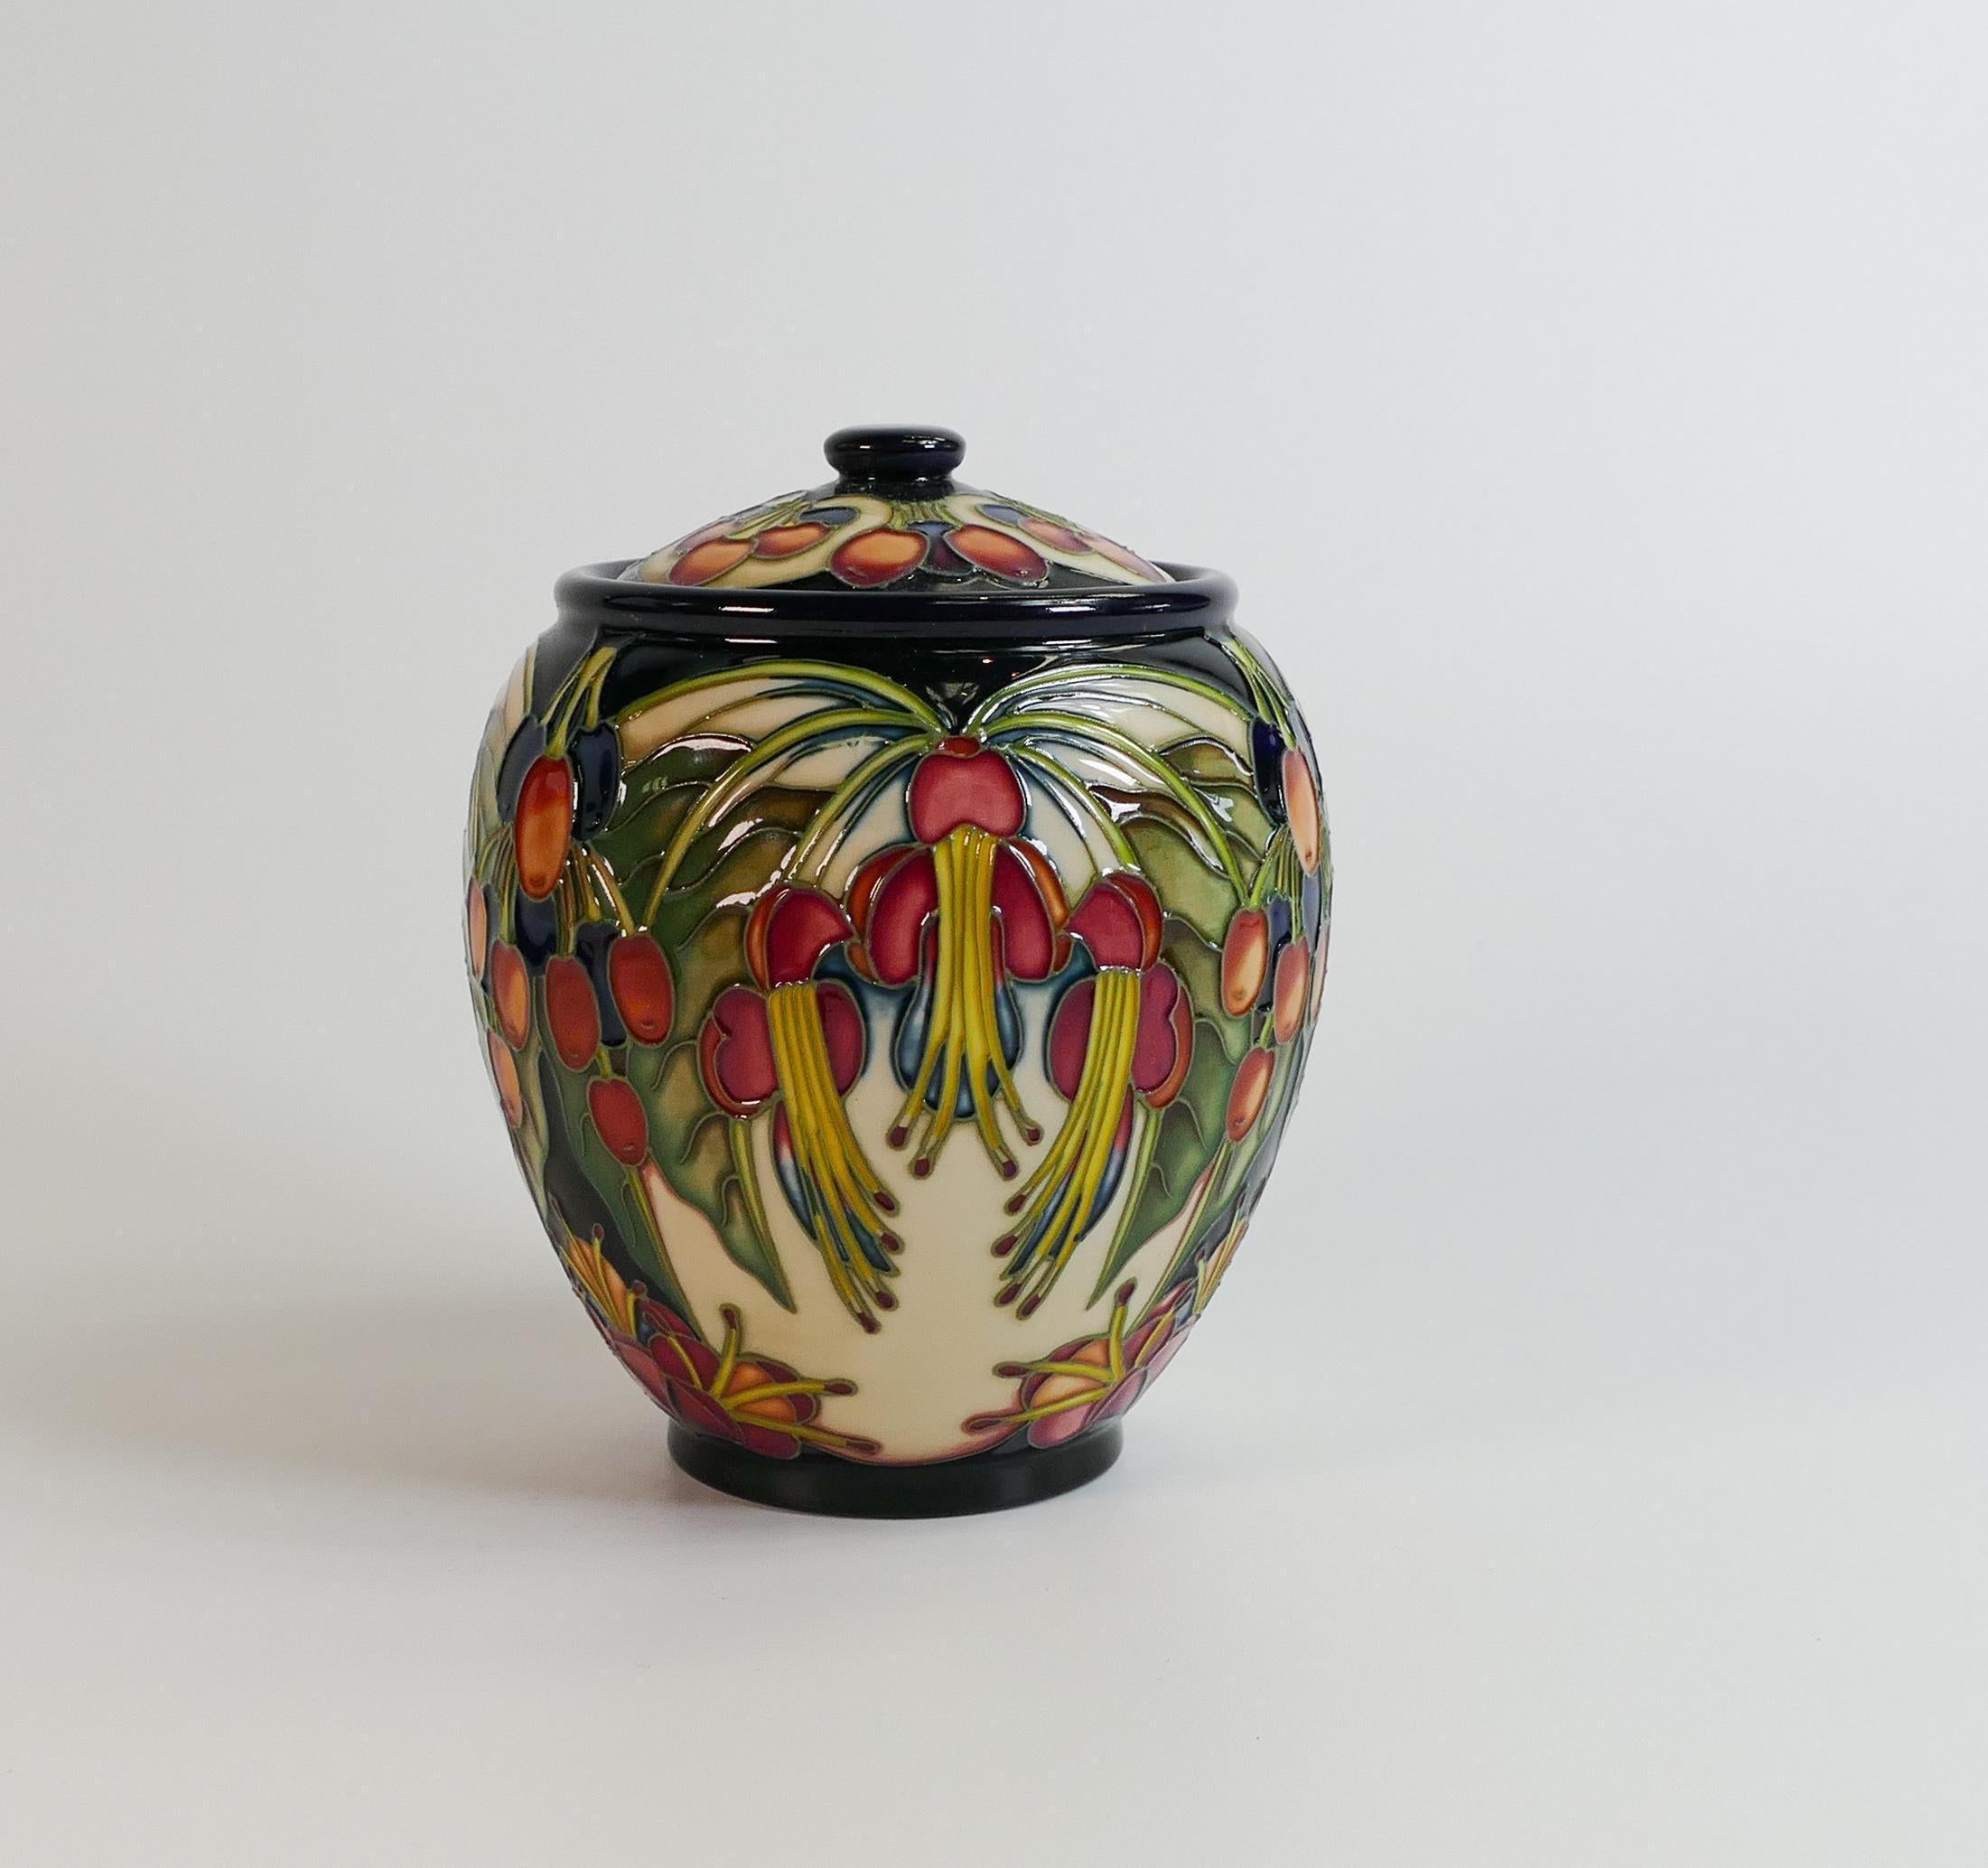 MOORCROFT Art Pottery PURIRI Tree pattern by Philip Gibson designer-lidded pot. Dated 2004. BOXED.

A Moorcroft pottery biscuit barrel and cover in the Puriri Tree pattern, of shouldered baluster form, designed by Philip Gibson, impressed mark verso